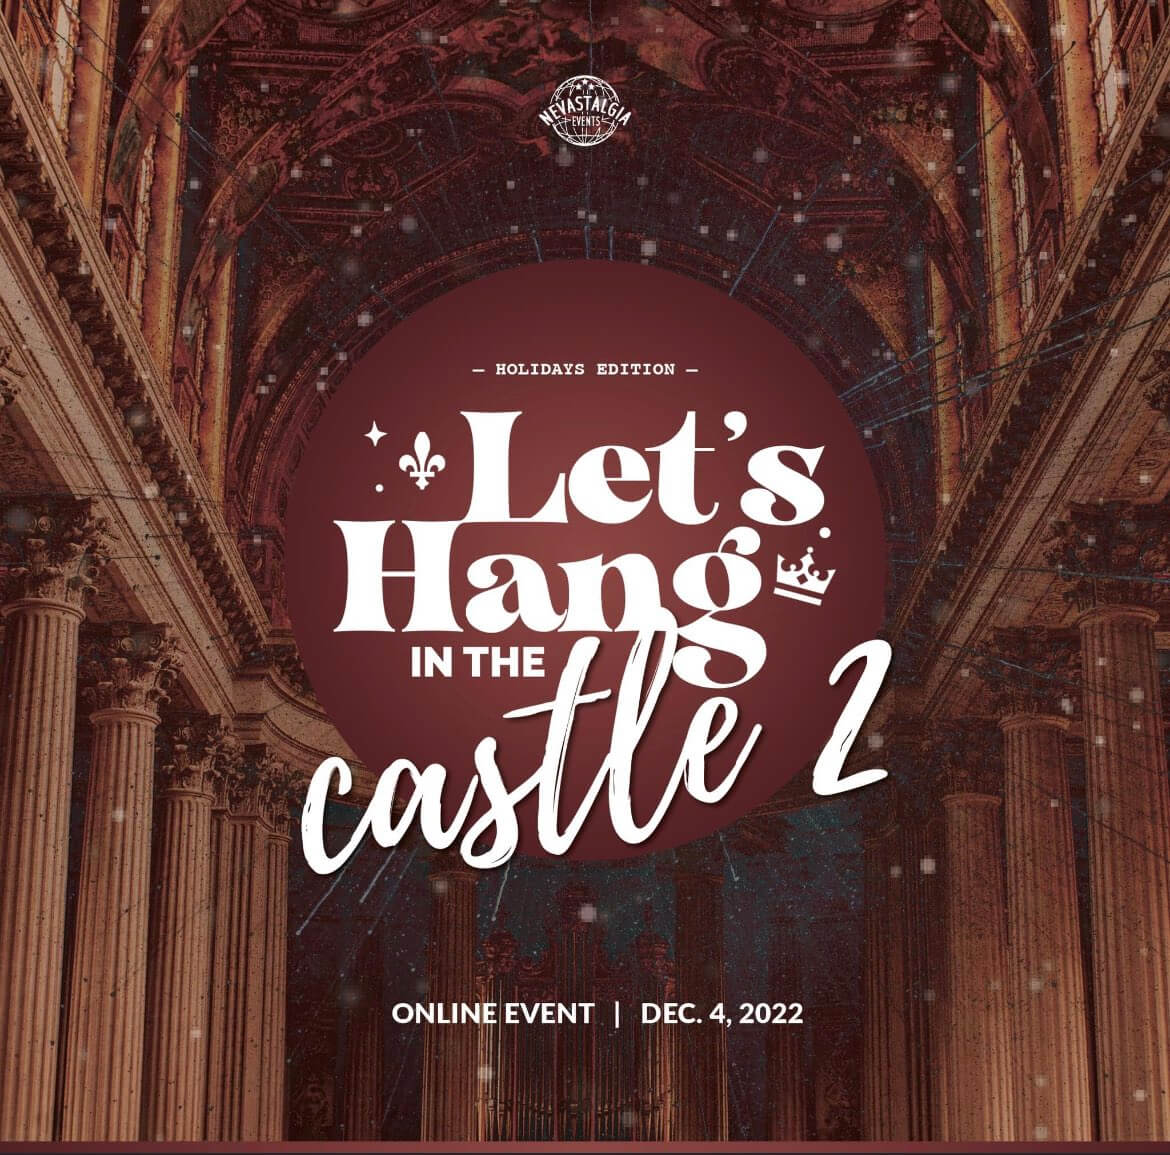 Let’s Hang in the Castle 2